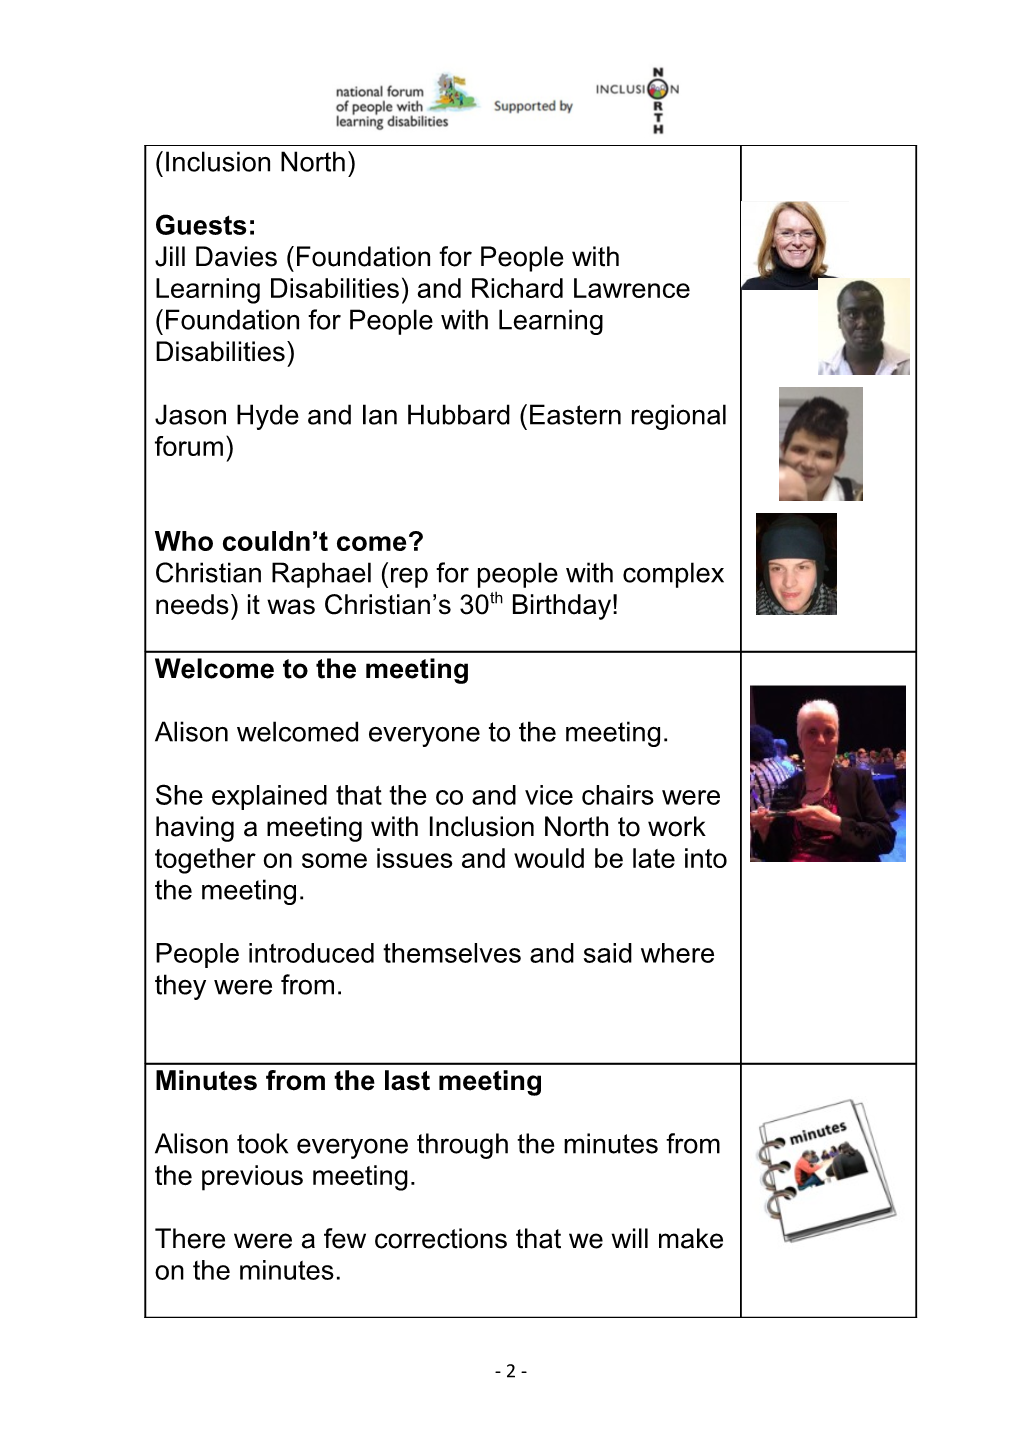 National Forum of People with Learning Disabilities